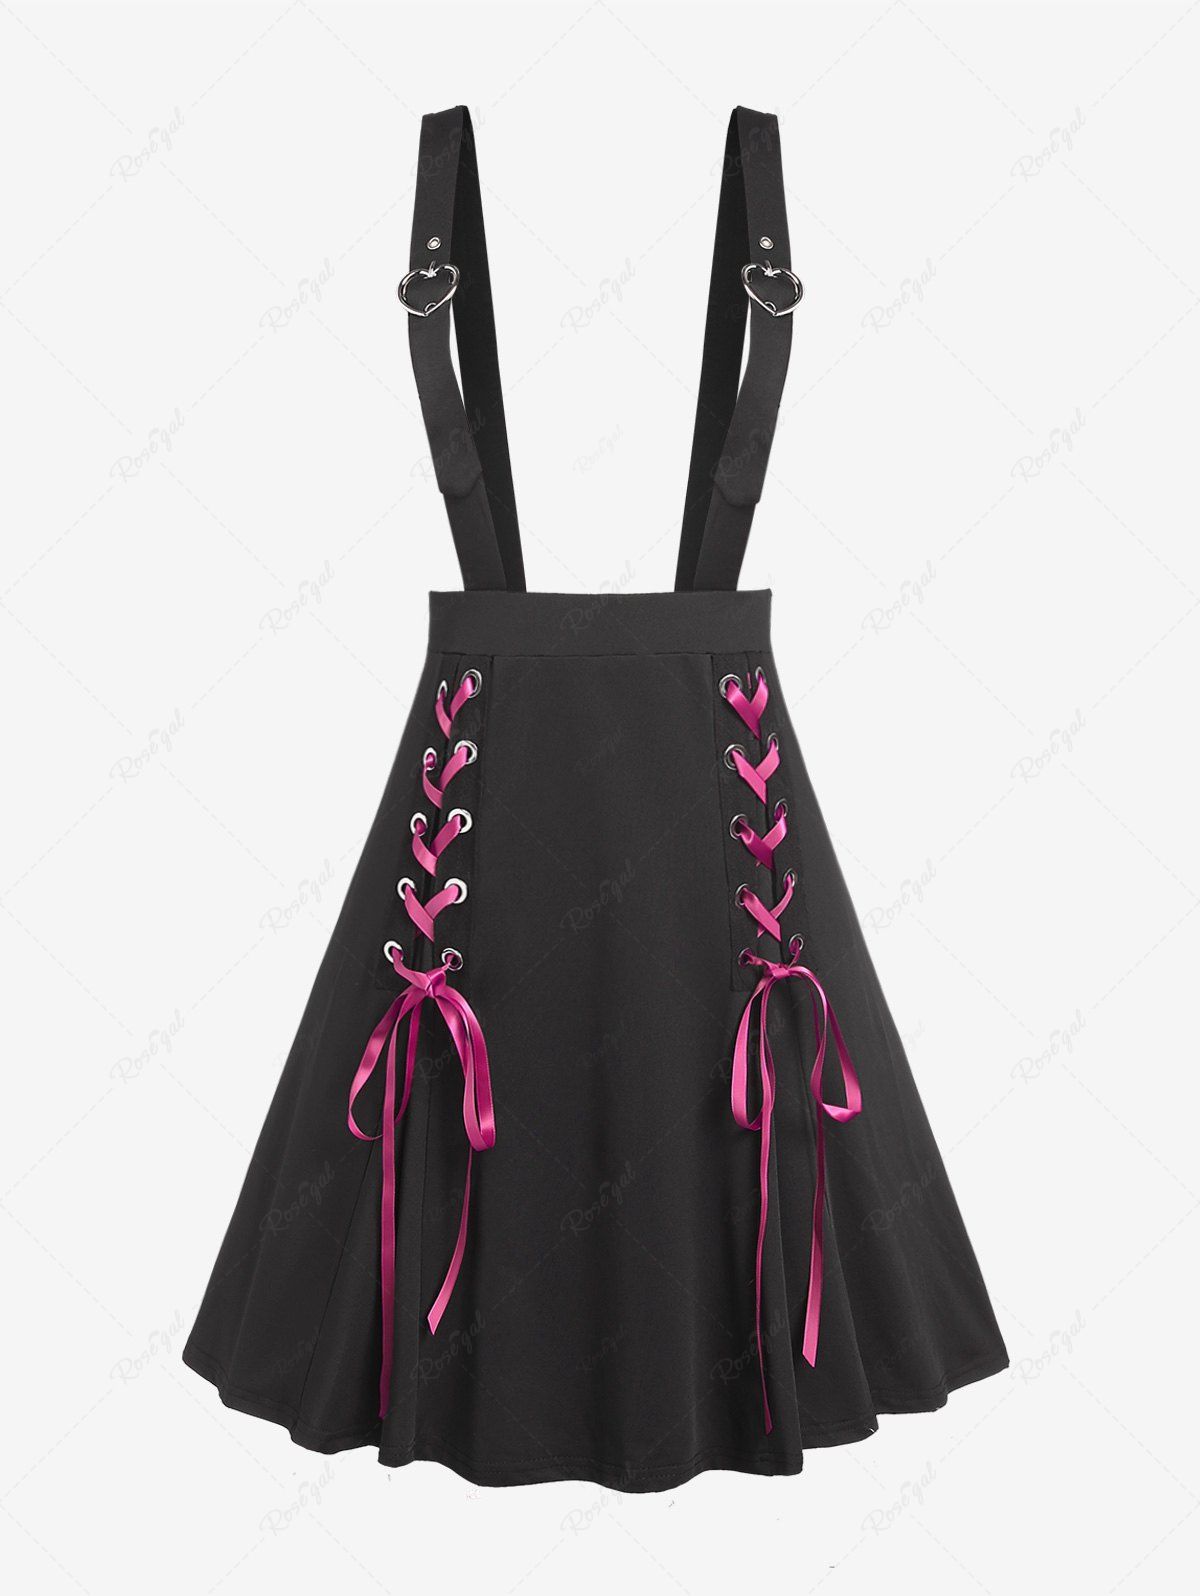 Outfit Plus Size Heart Buckles Lace Up Suspender Skirt  